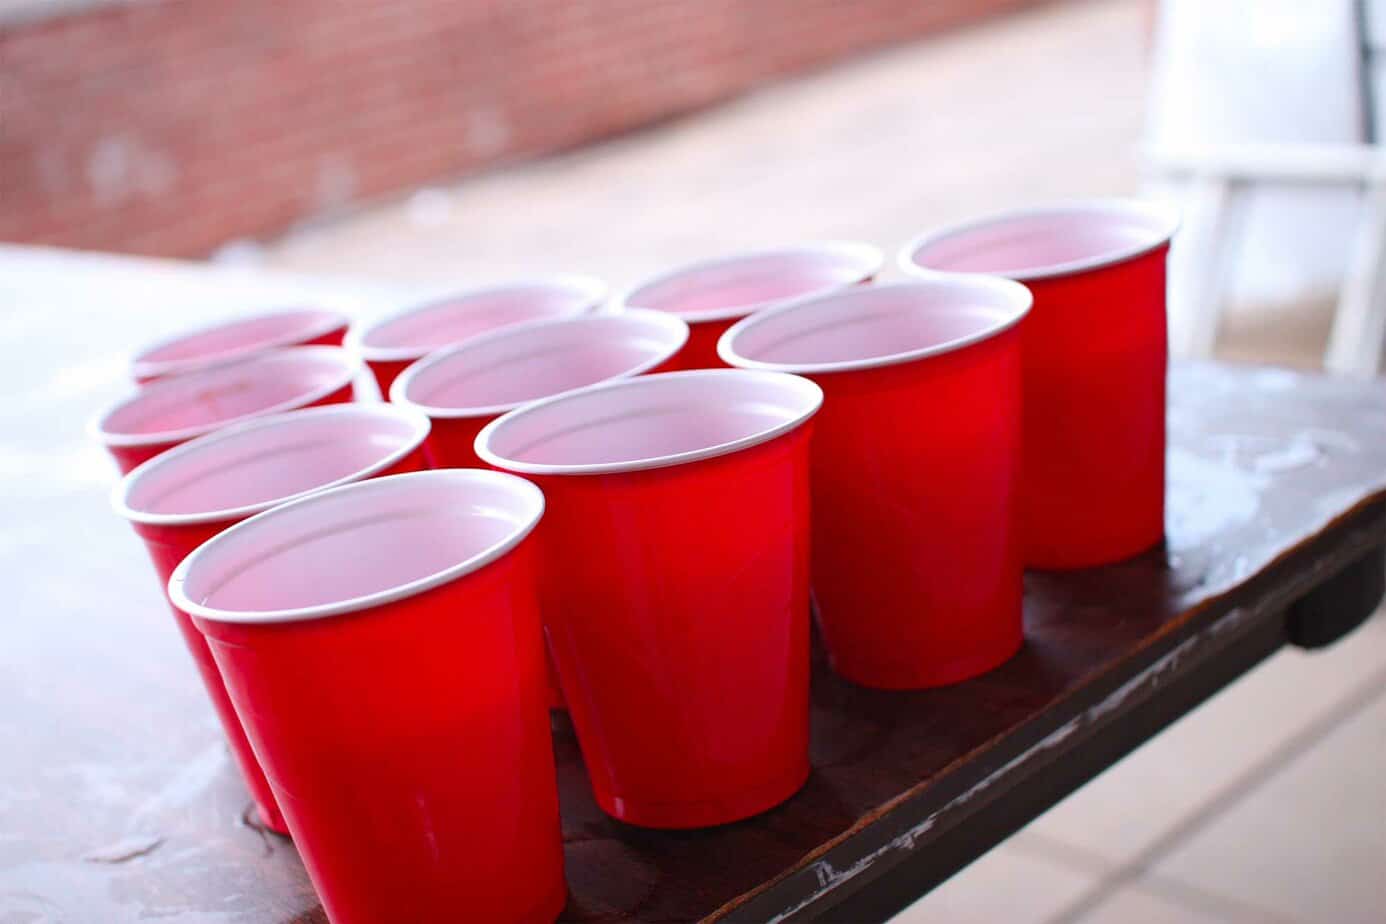 red solo cup beer pong on table